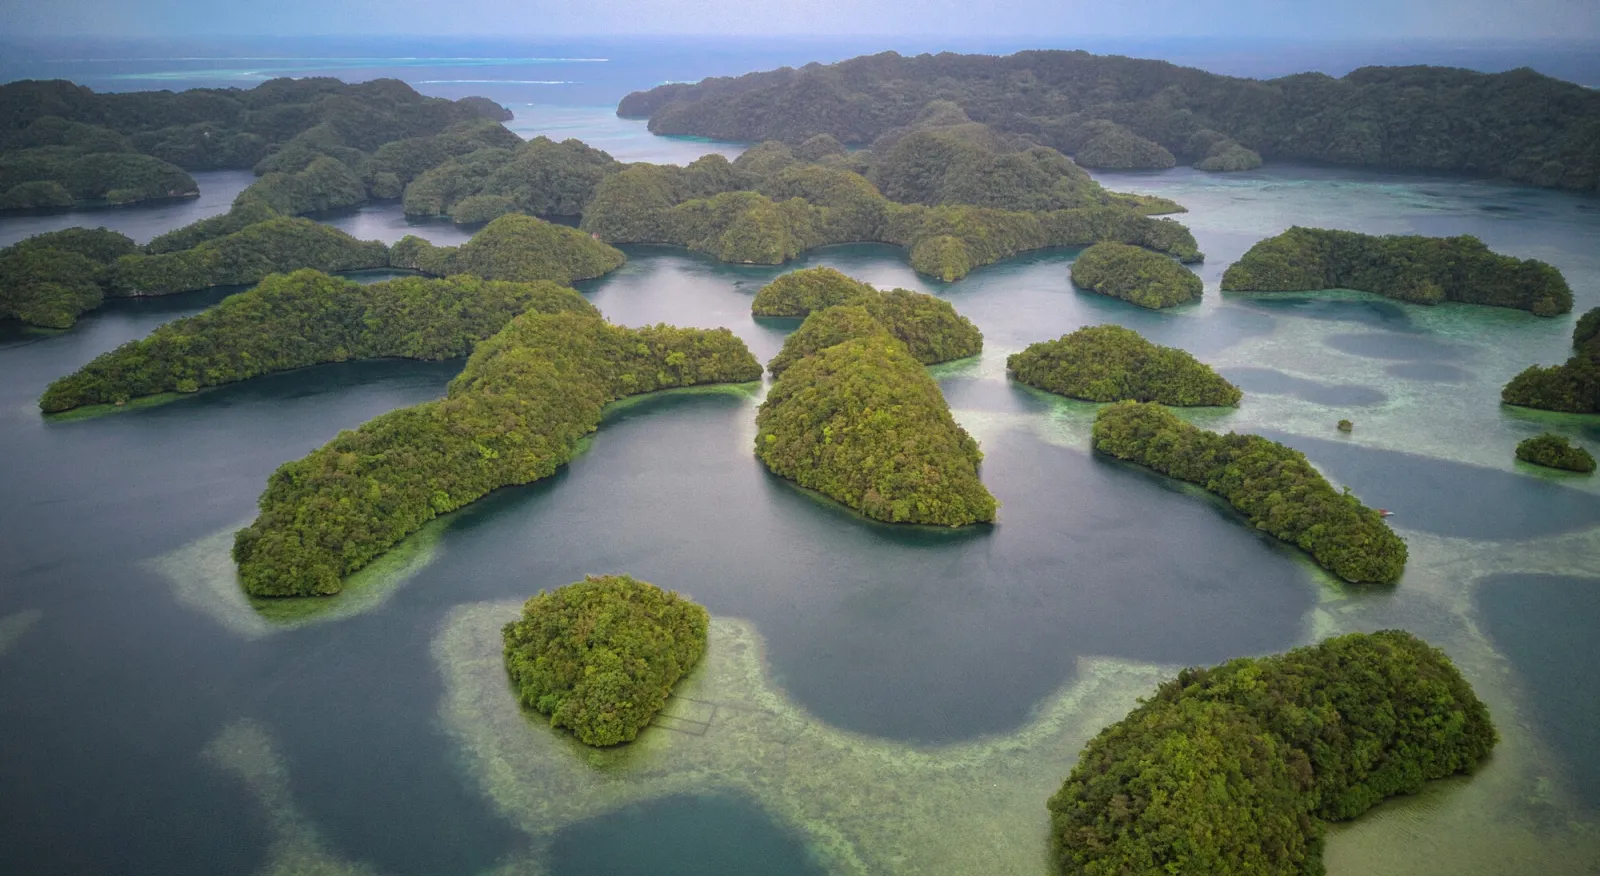 A drone shot from Palau, over the area of Koror. There are many green islands separated by dark blue water.